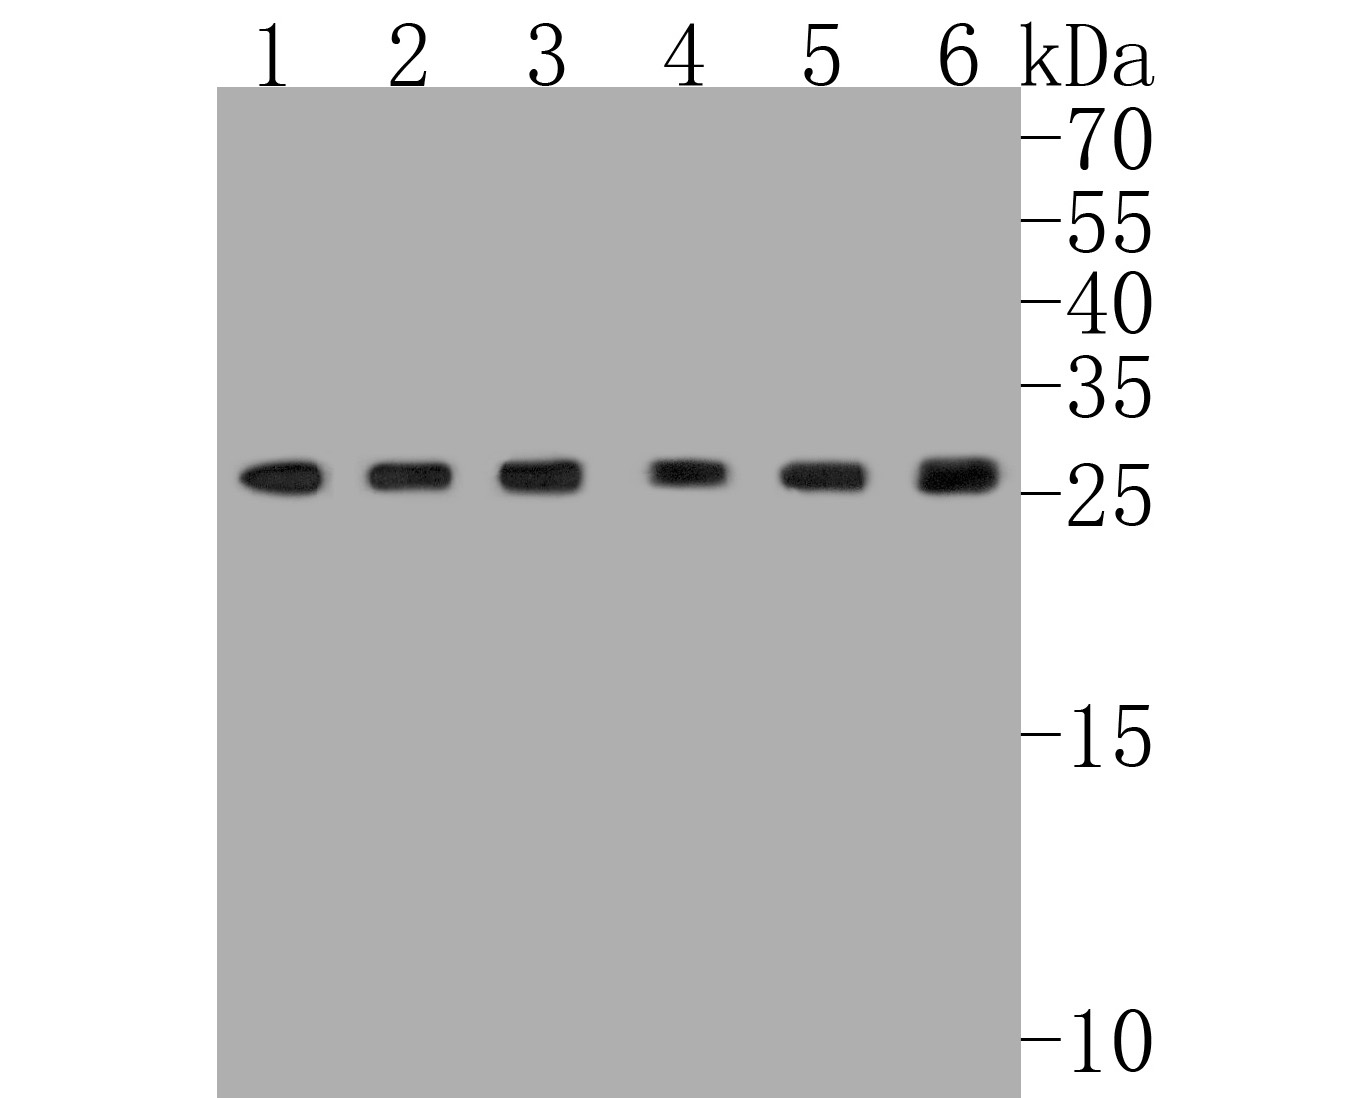 Western blot analysis of GTF2F2 on different lysates with Rabbit anti-GTF2F2 antibody (ET7111-08) at 1/1,000 dilution.<br />
<br />
Lane 1: Rat testis tissue lysate<br />
Lane 2: A549 cell lysate<br />
Lane 3: HepG2 cell lysate<br />
Lane 4: HL-60 cell lysate<br />
Lane 5: THP-1 cell lysate<br />
Lane 6: Daudi cell lysate<br />
<br />
Lysates/proteins at 10 µg/Lane.<br />
<br />
Predicted band size: 28 kDa<br />
Observed band size: 28 kDa<br />
<br />
Exposure time: 2 minutes;<br />
<br />
15% SDS-PAGE gel.<br />
<br />
Proteins were transferred to a PVDF membrane and blocked with 5% NFDM/TBST for 1 hour at room temperature. The primary antibody (ET7111-08) at 1/1,000 dilution was used in 5% NFDM/TBST at room temperature for 2 hours. Goat Anti-Rabbit IgG - HRP Secondary Antibody (HA1001) at 1:5,000 dilution was used for 1 hour at room temperature.